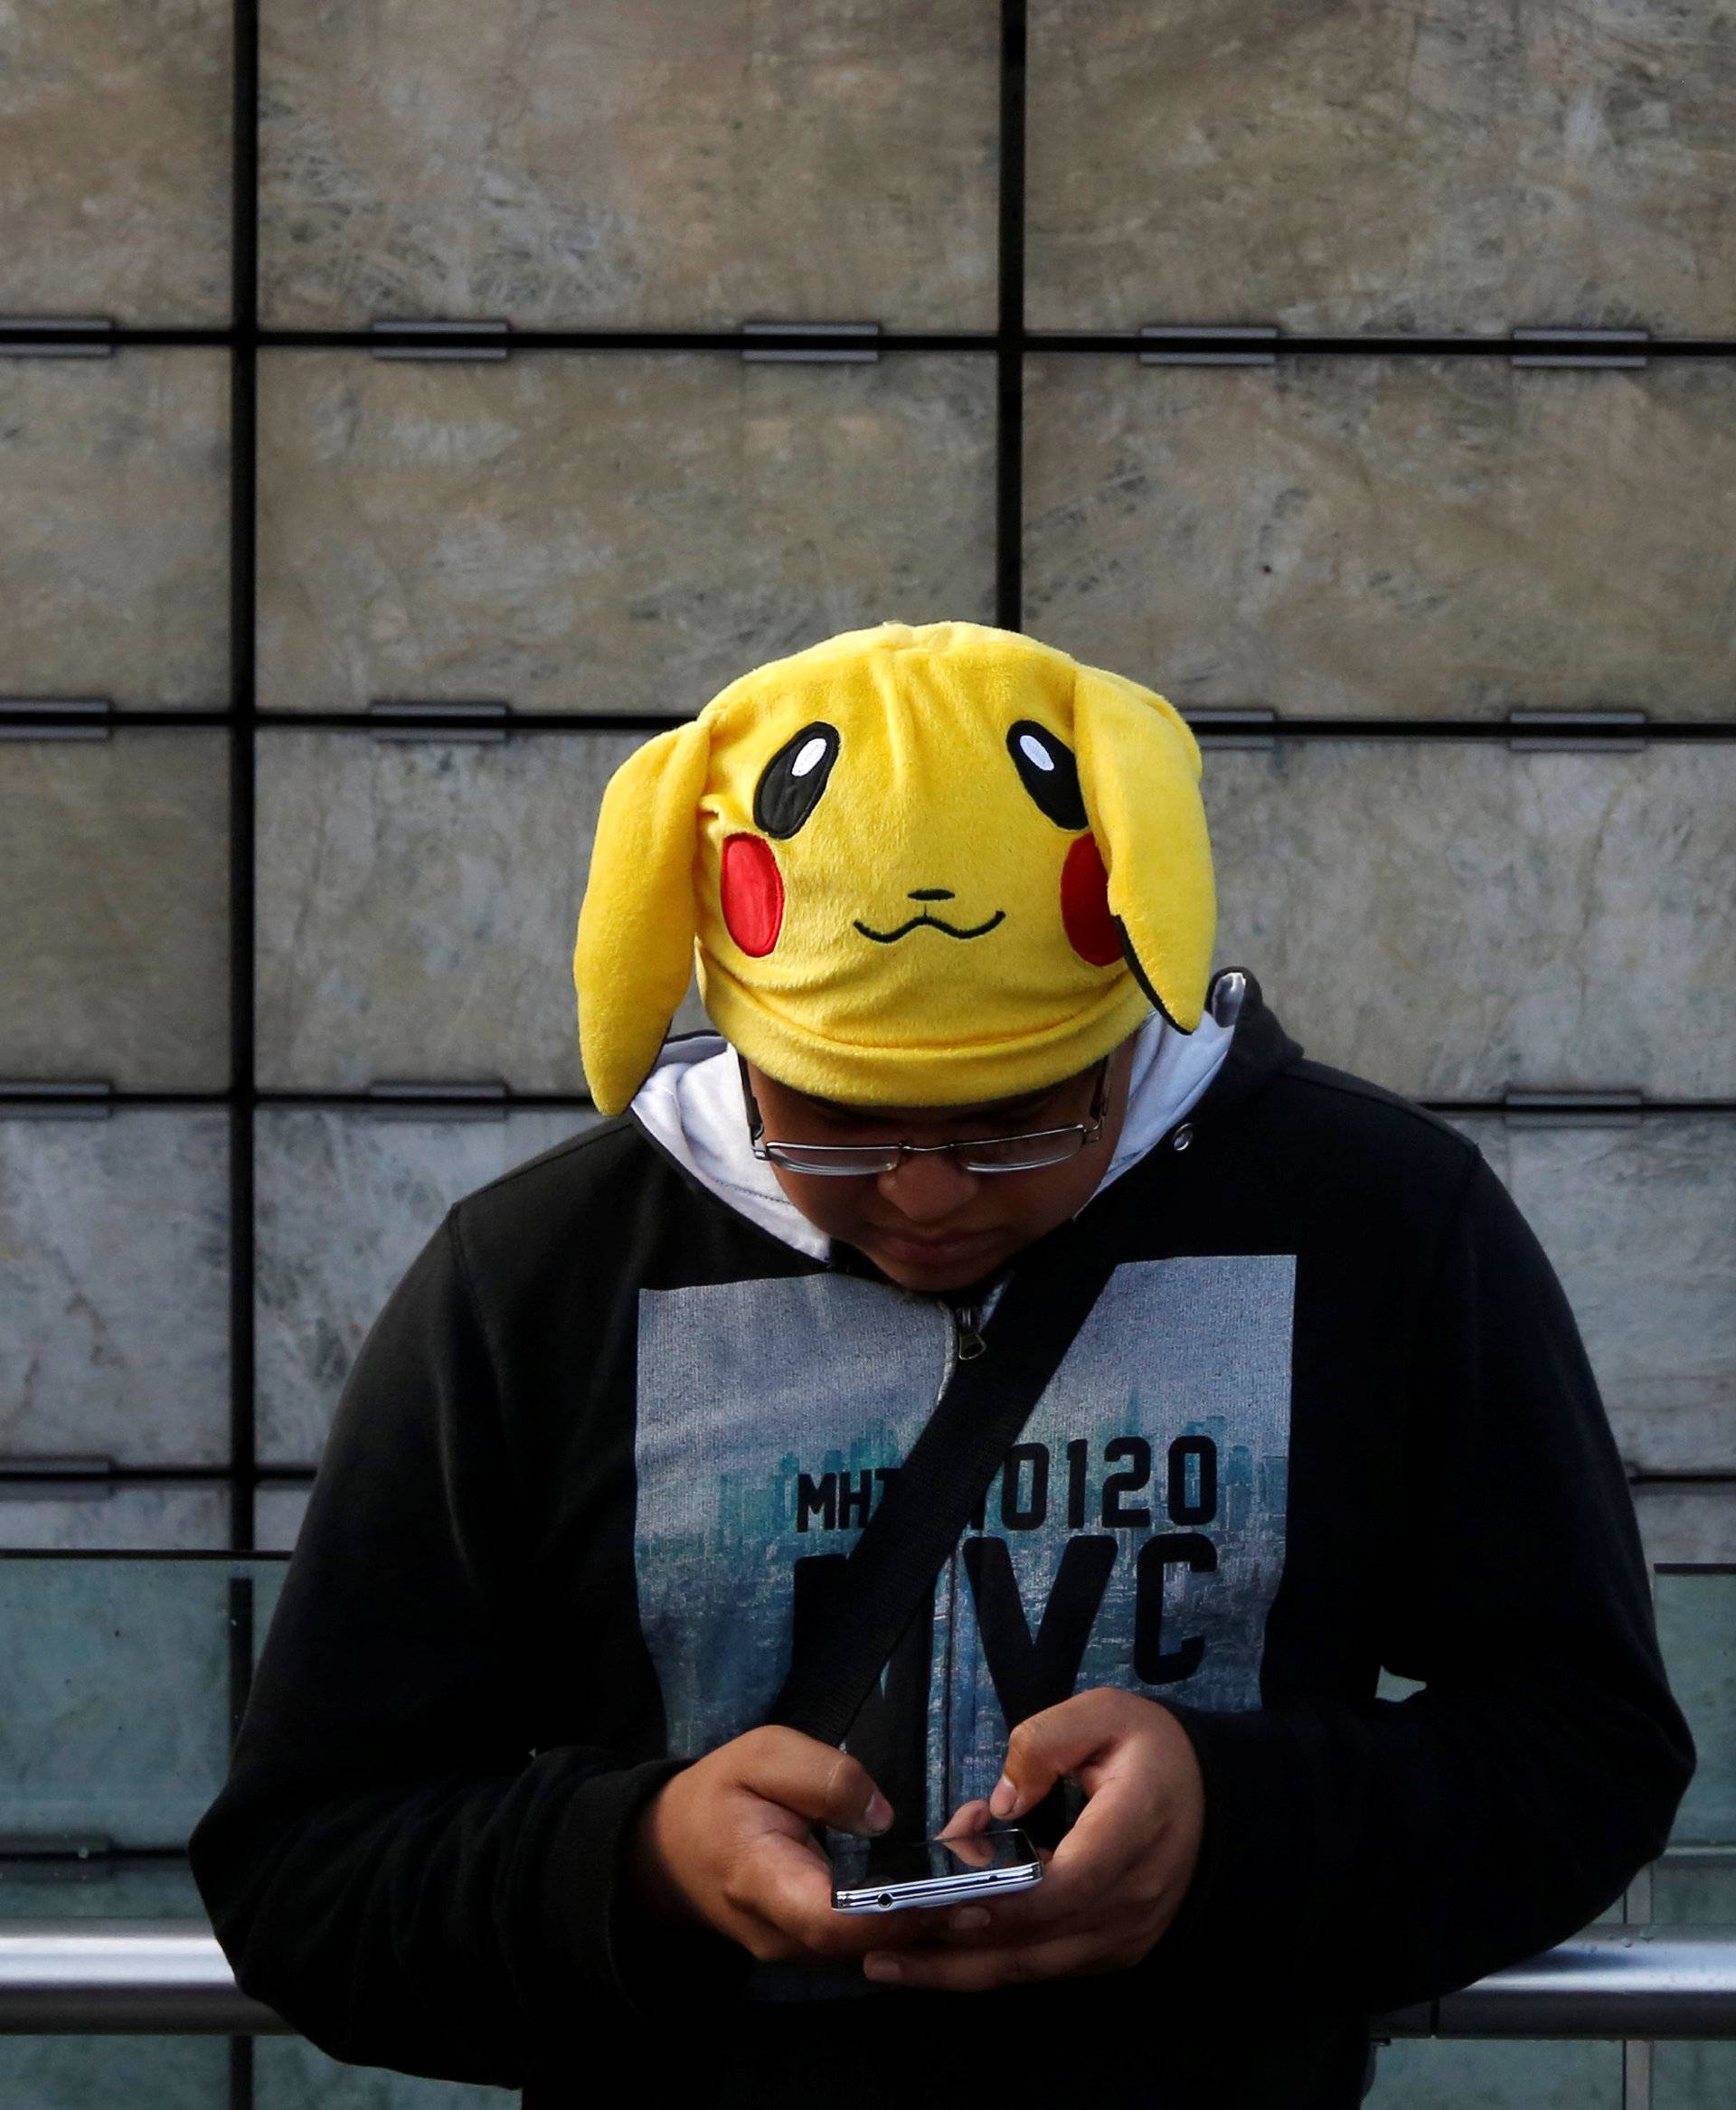 A man wearing a Pikachu hat, a character from Pokemon, plays Pokemon Go during a gathering to celebrate "Pokemon Day" in Mexico City, Mexico